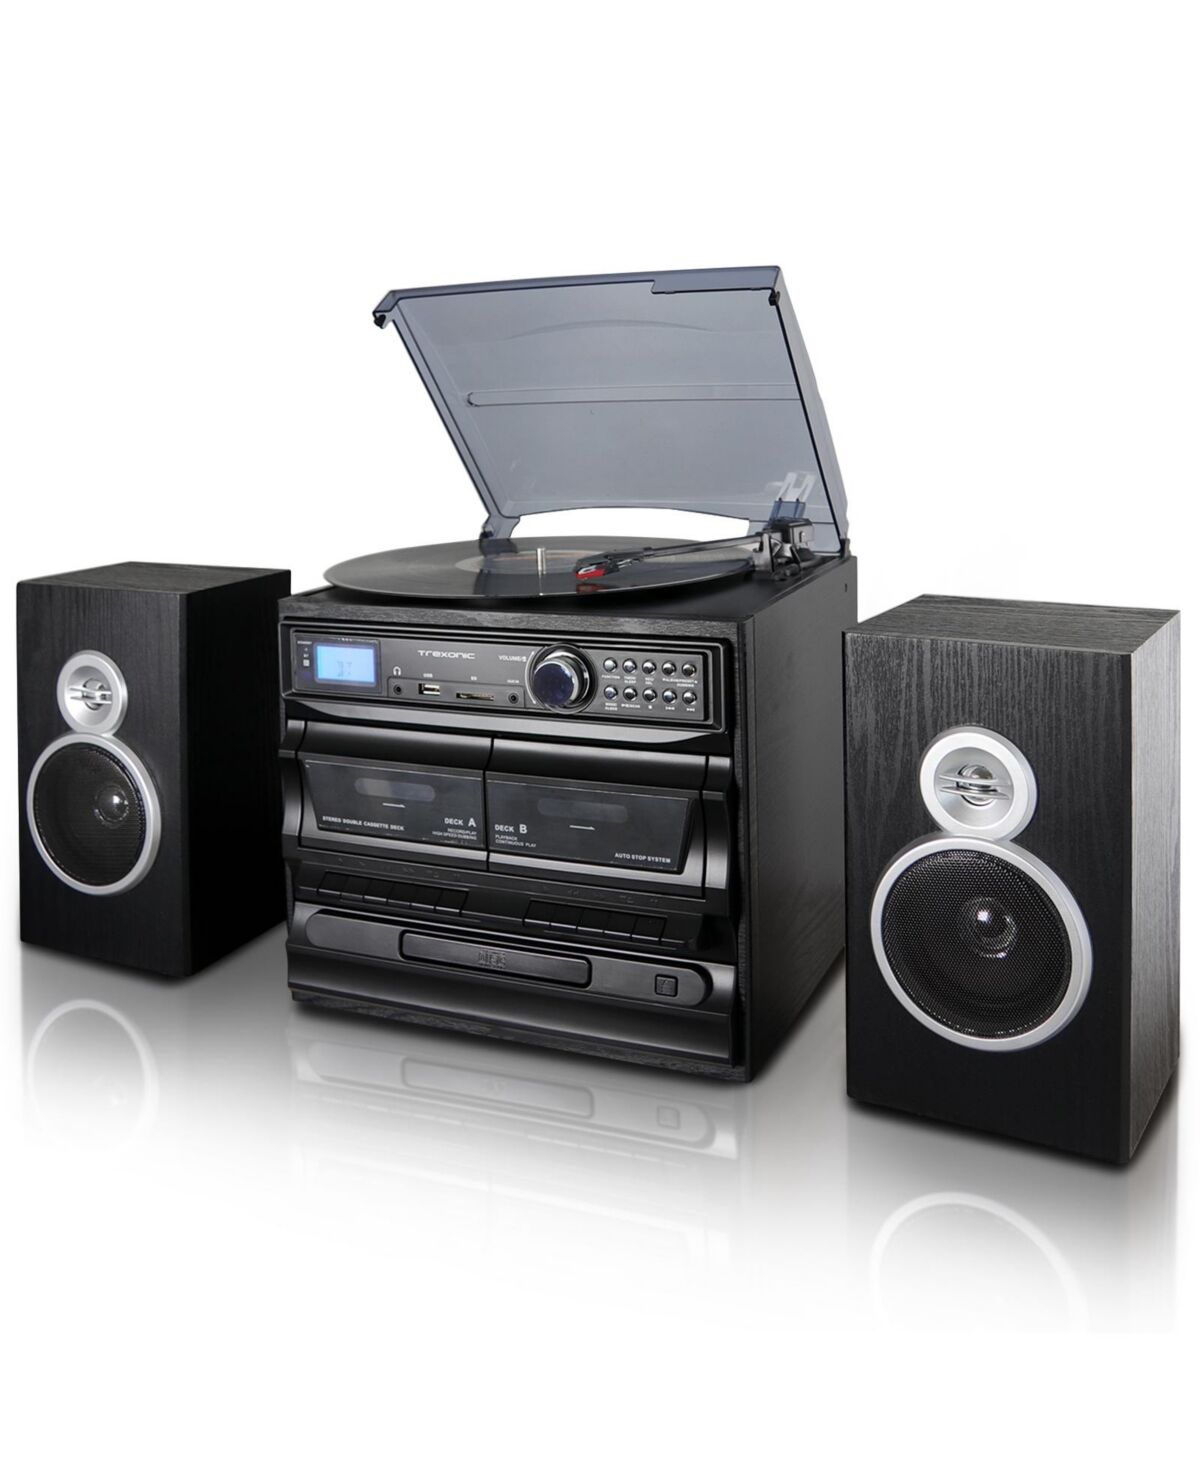 Trexonic 3-Speed Vinyl Turntable Home Stereo System with Cd Player, Dual Cassette Player, Bluetooth, Fm Radio & Usb/Sd Recording and Wired Shelf Speak